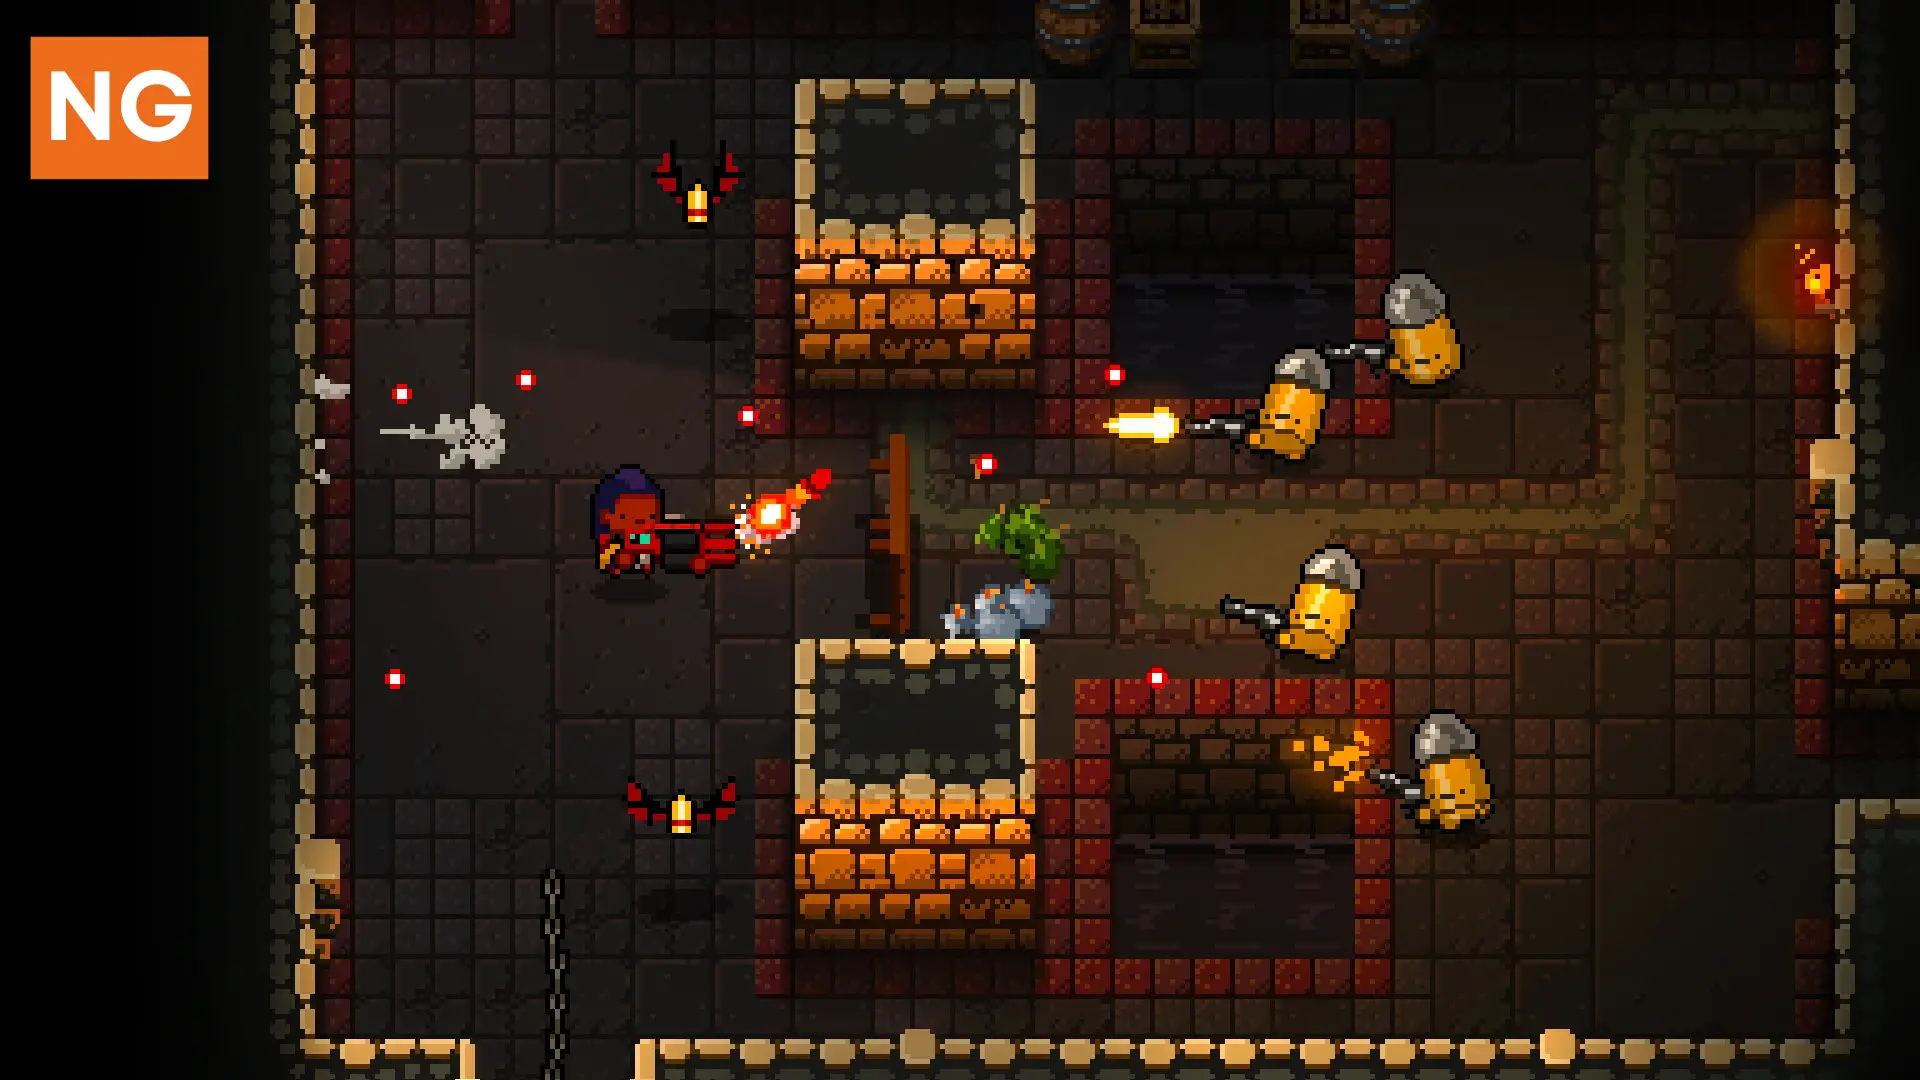 How to Get All the Characters in Enter the Gungeon